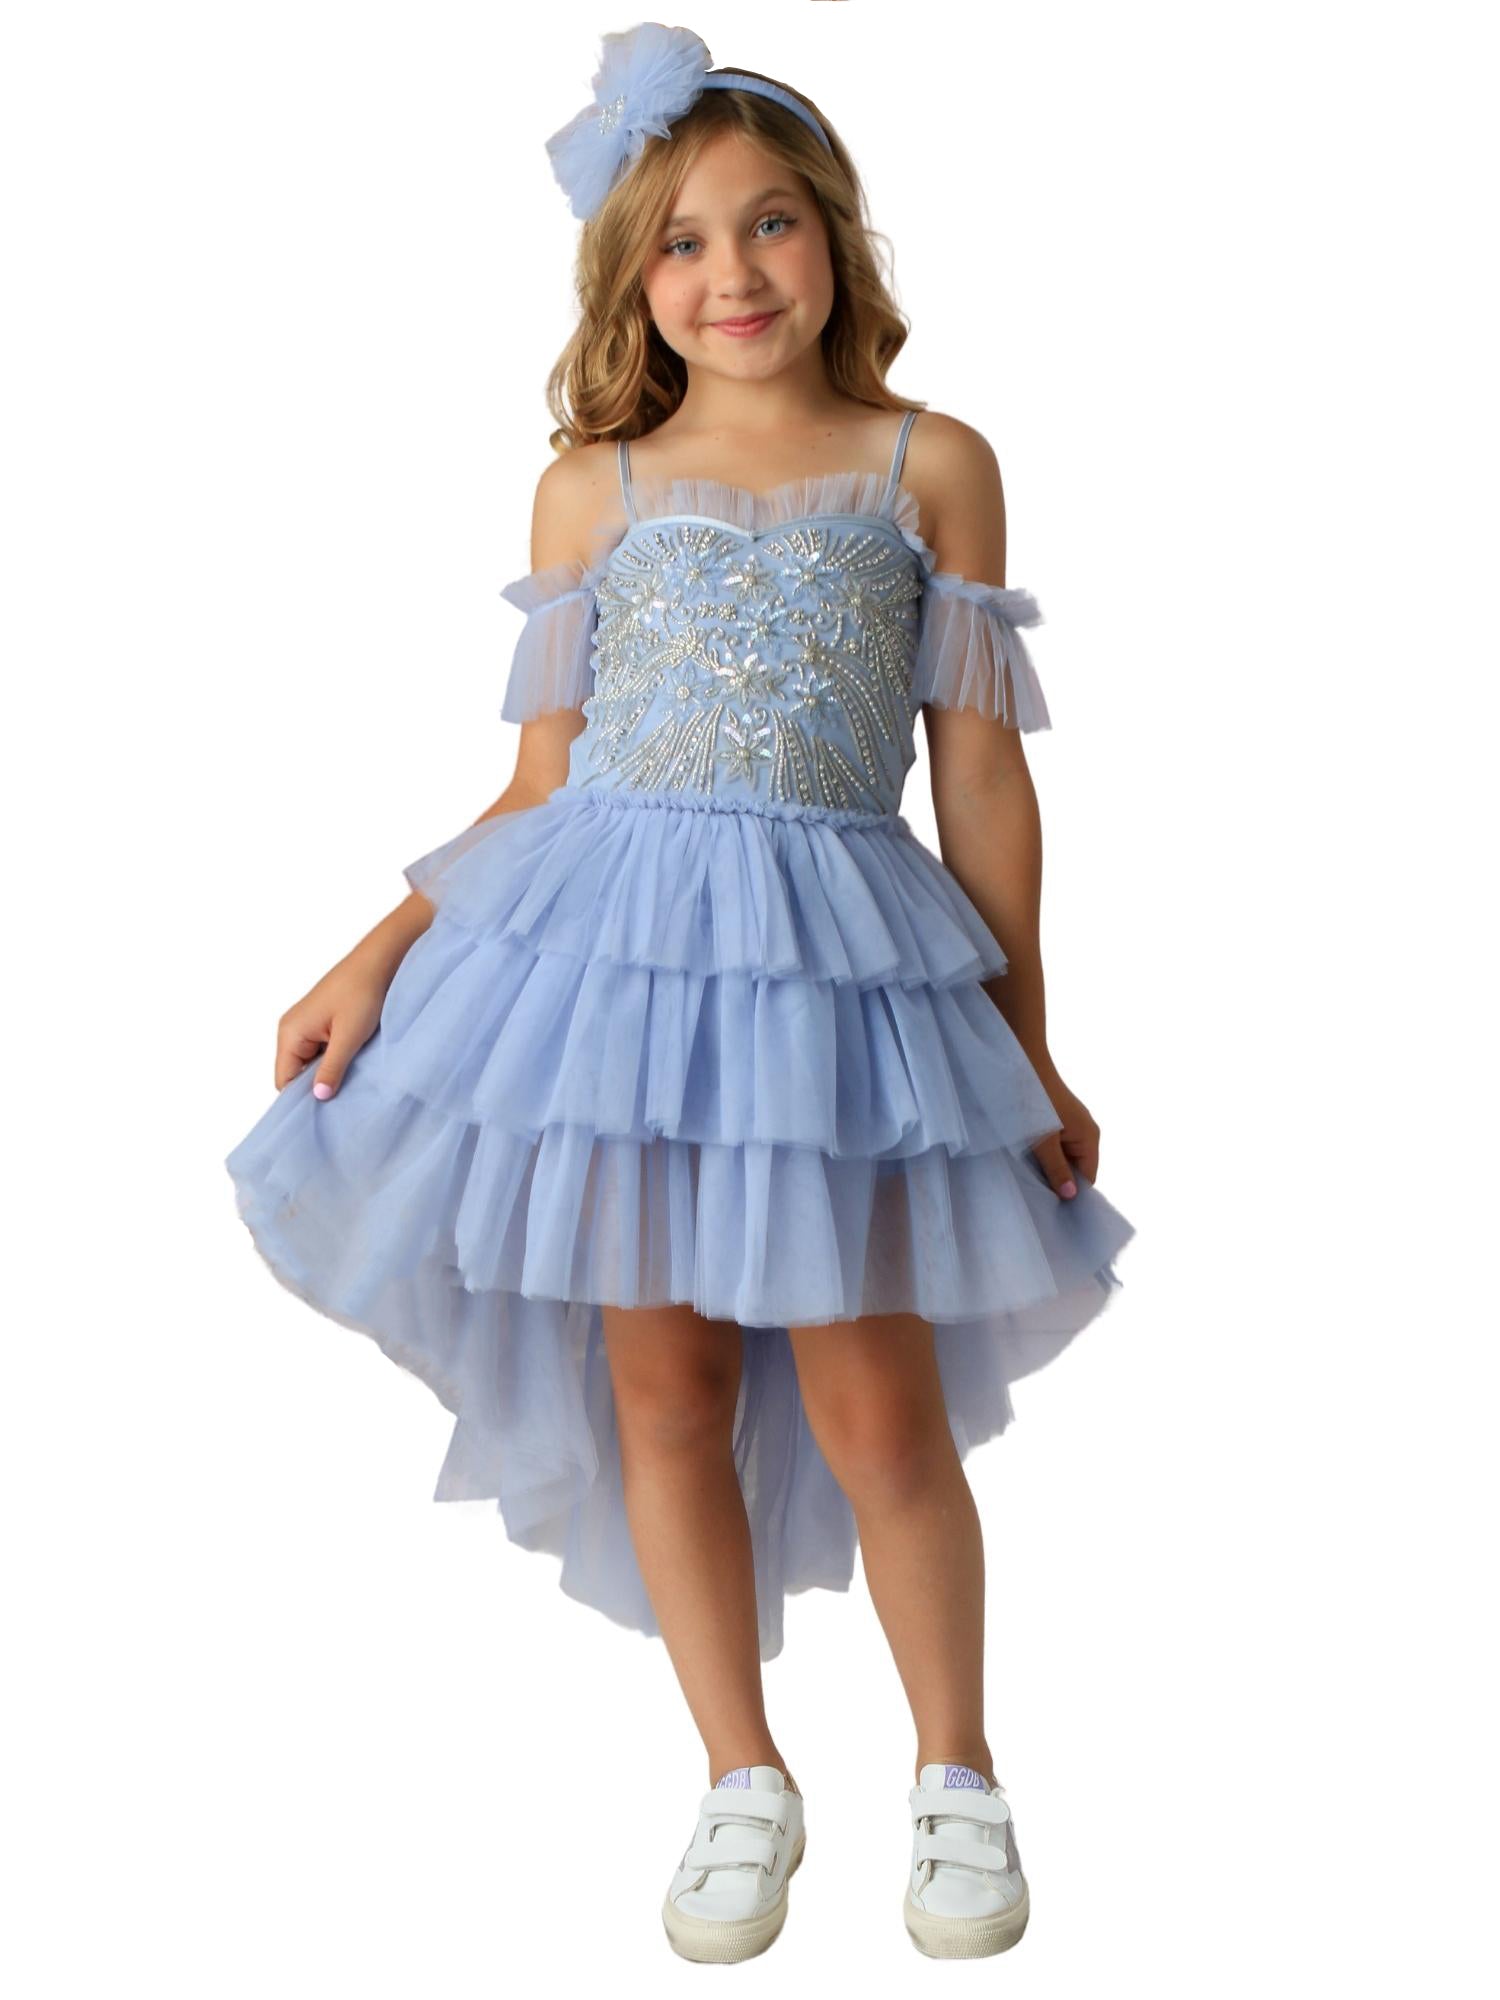 Beautiful Sleeveless Birthday Party Dresses for Princess 0-3 month